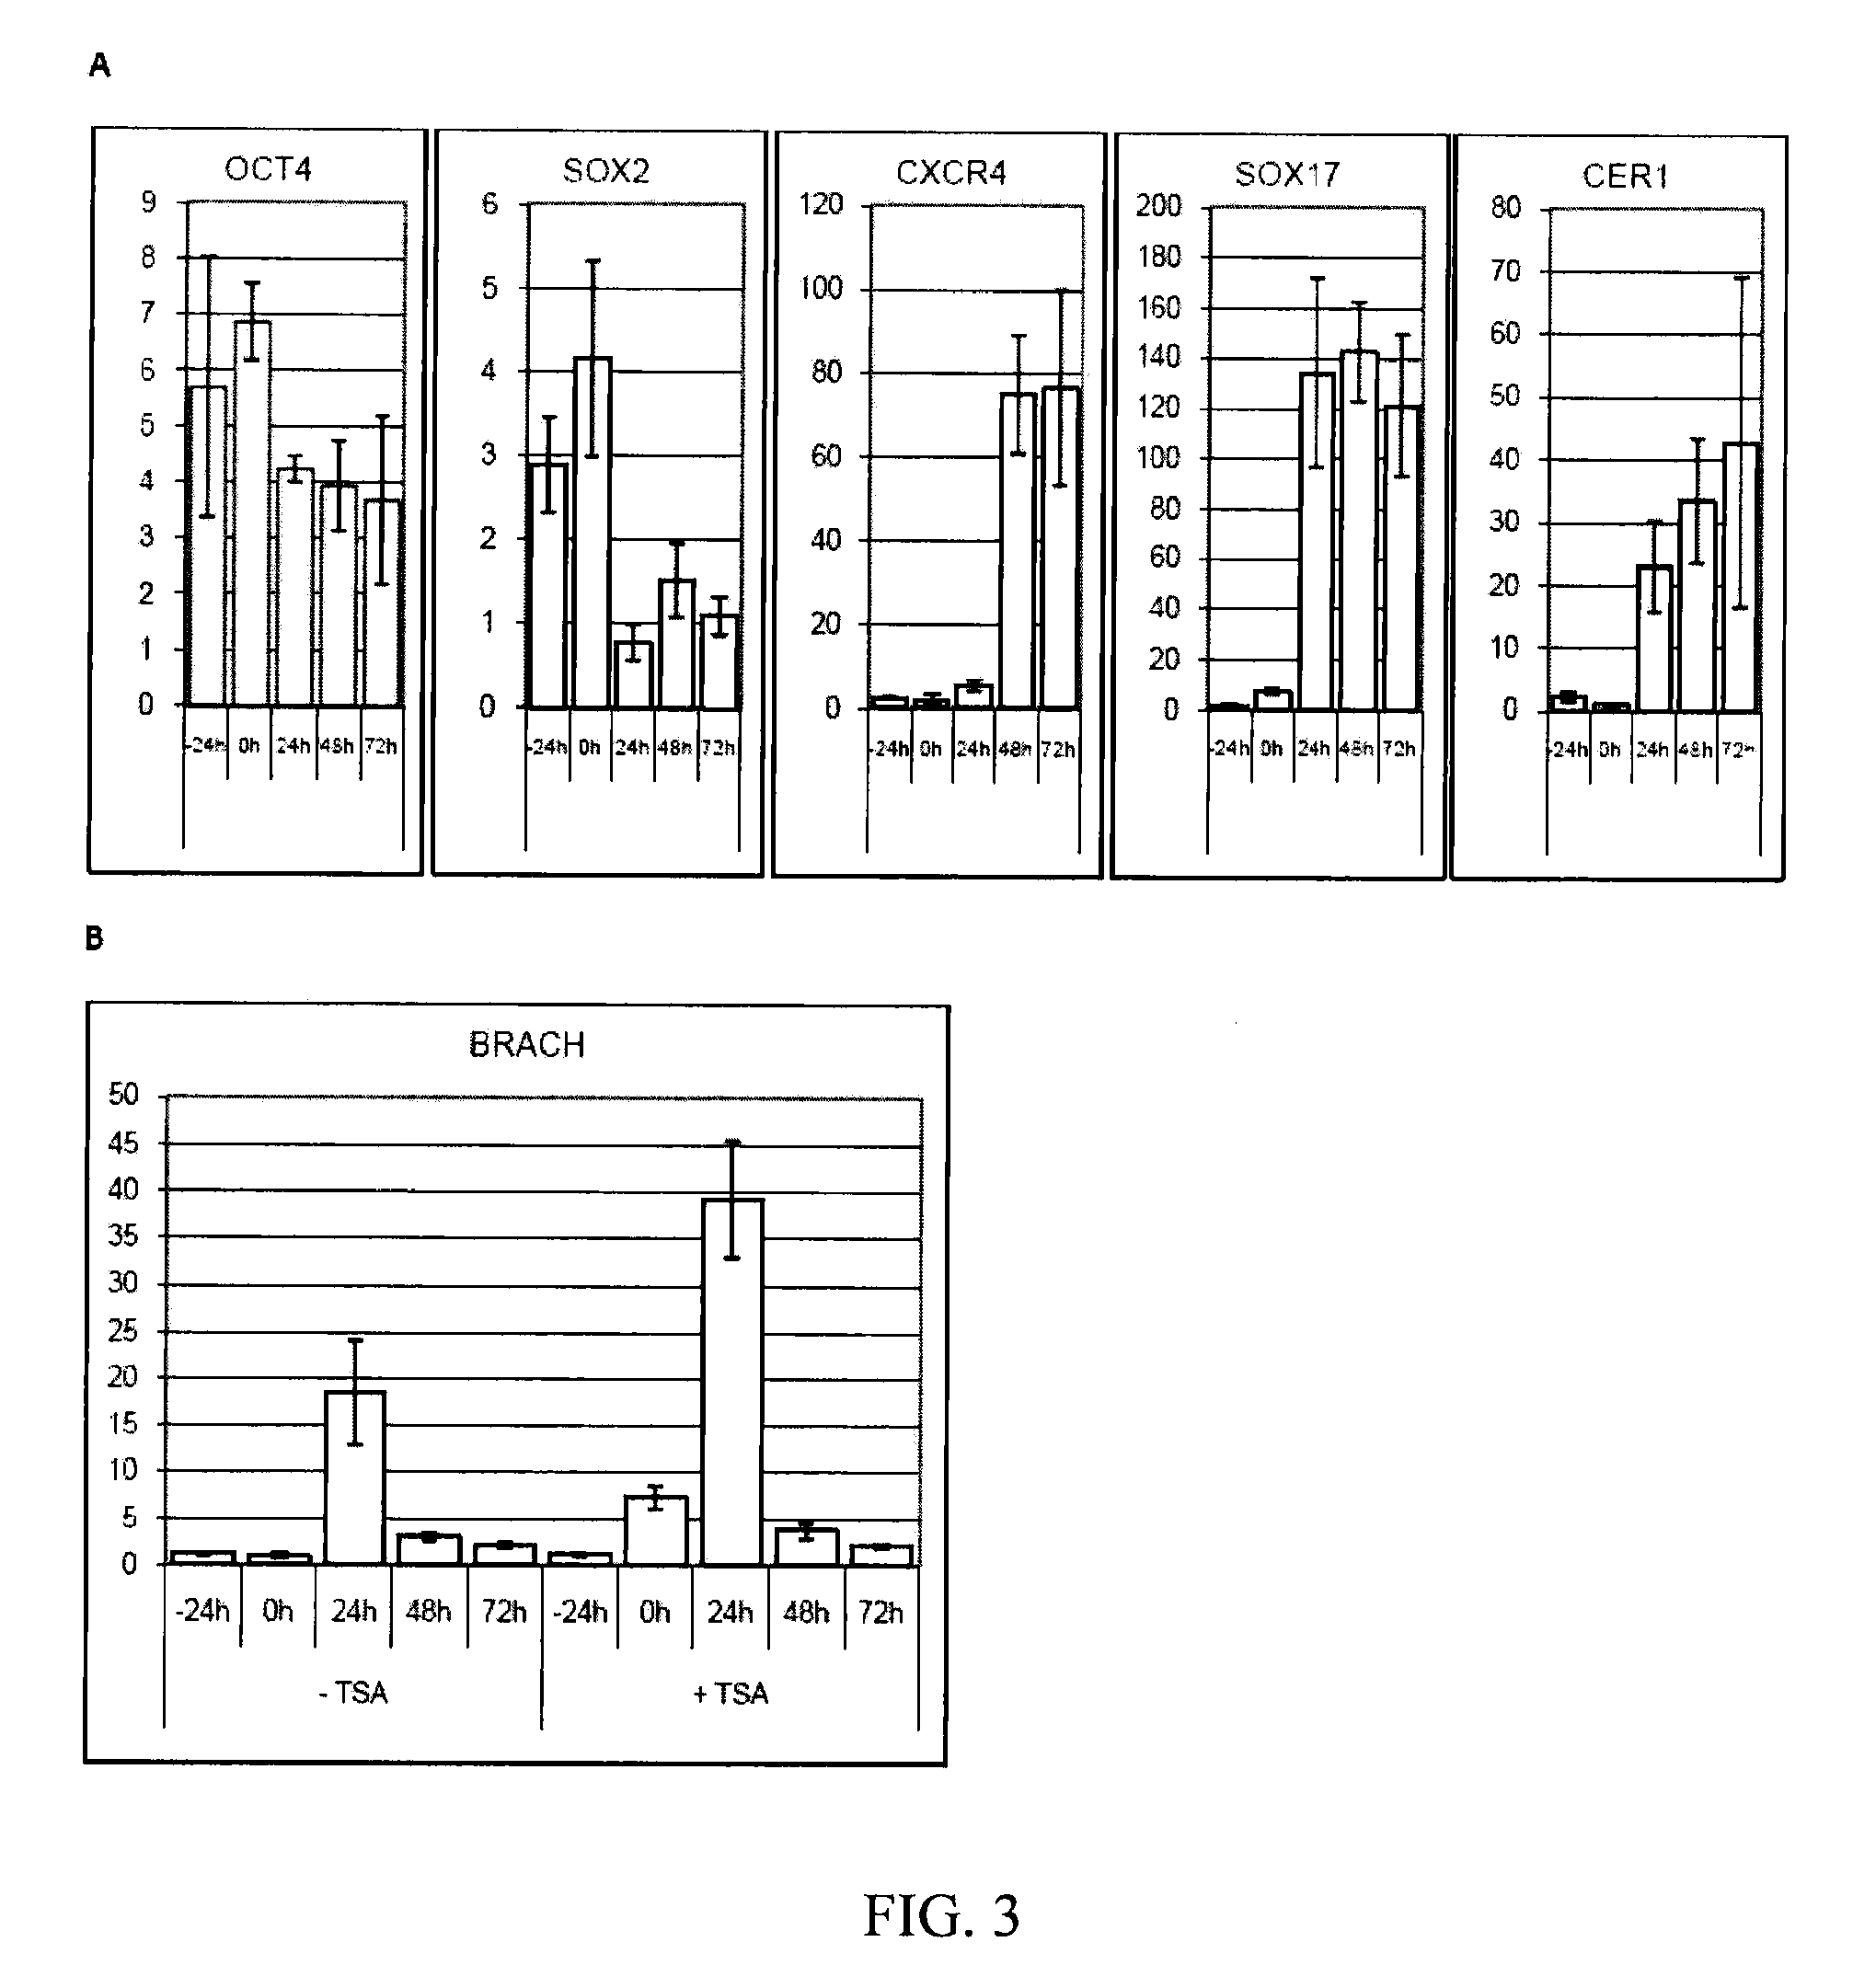 Methods of Deriving Differentiated Cells from Stem Cells